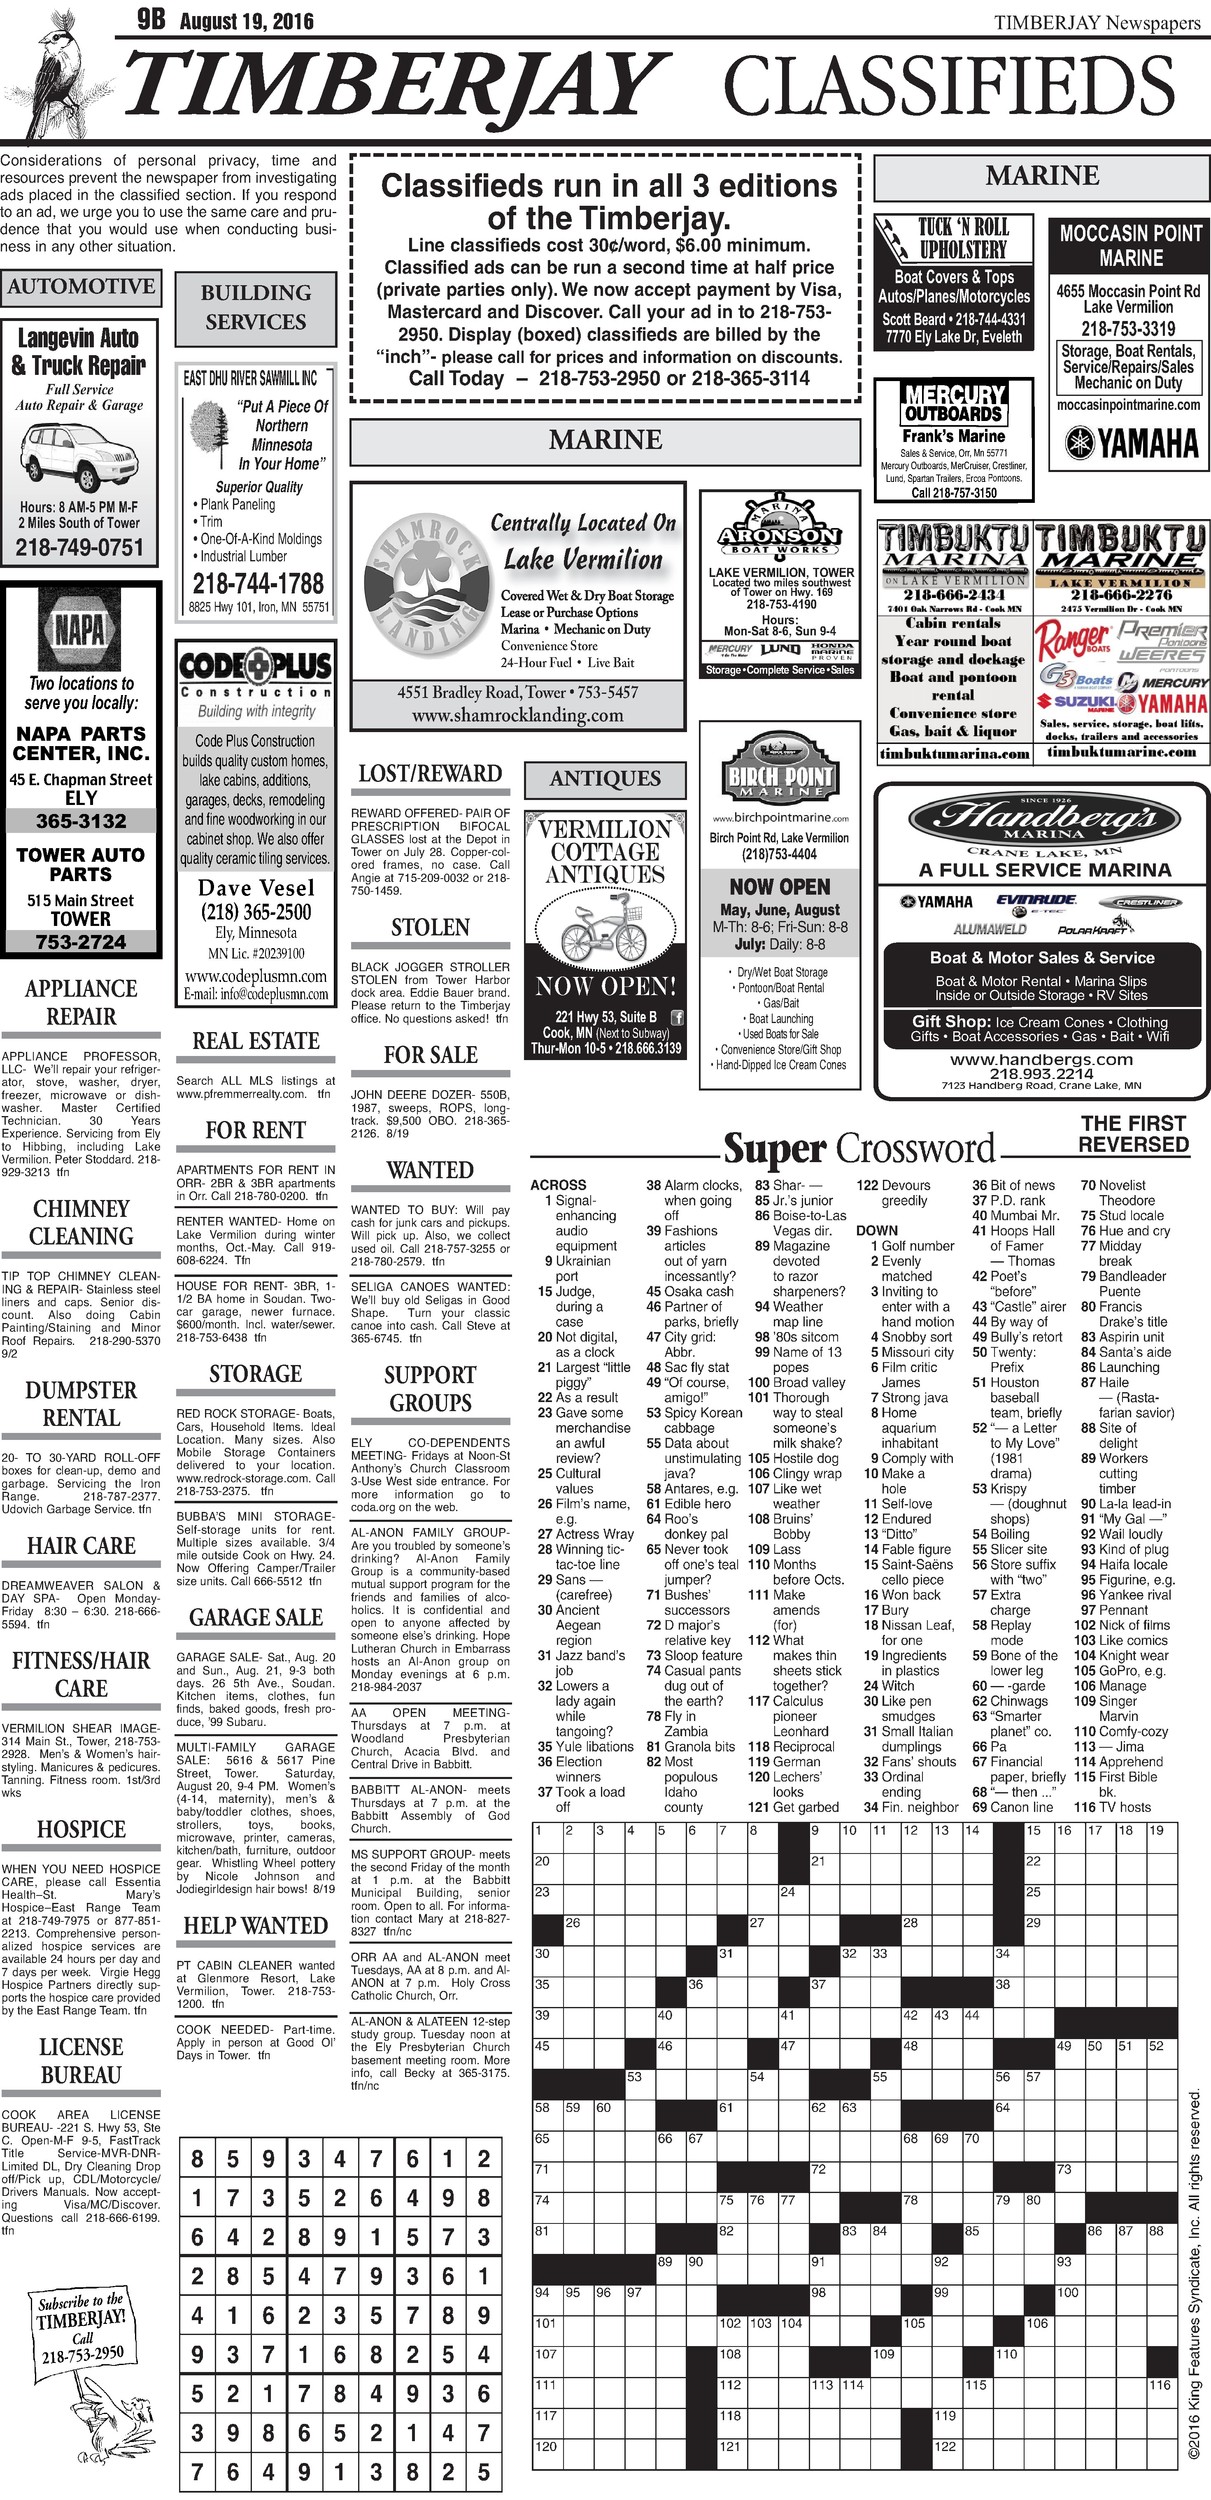 Click here to download the legal notices and classifieds from page 9B